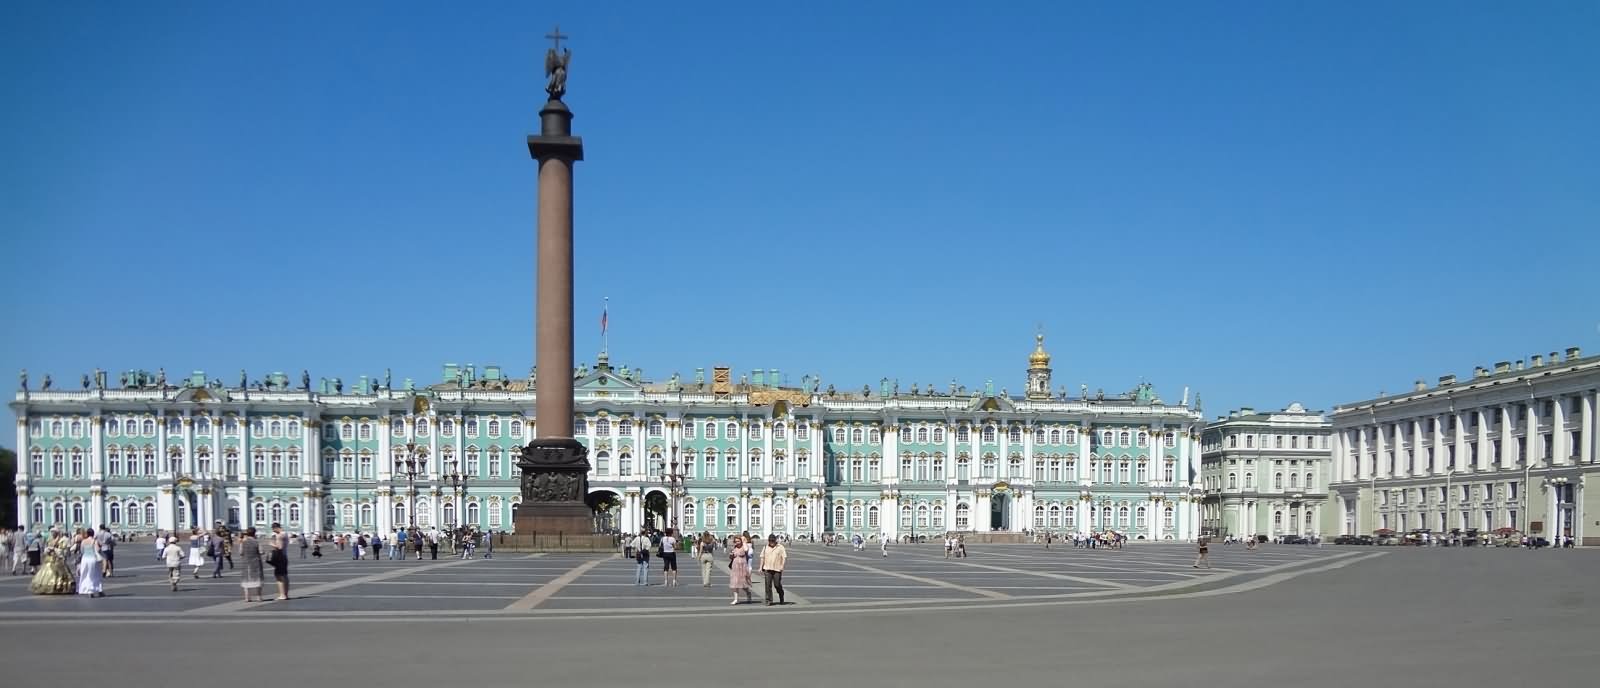 Panorama View Of The Hermitage Museum And Alexander's Column